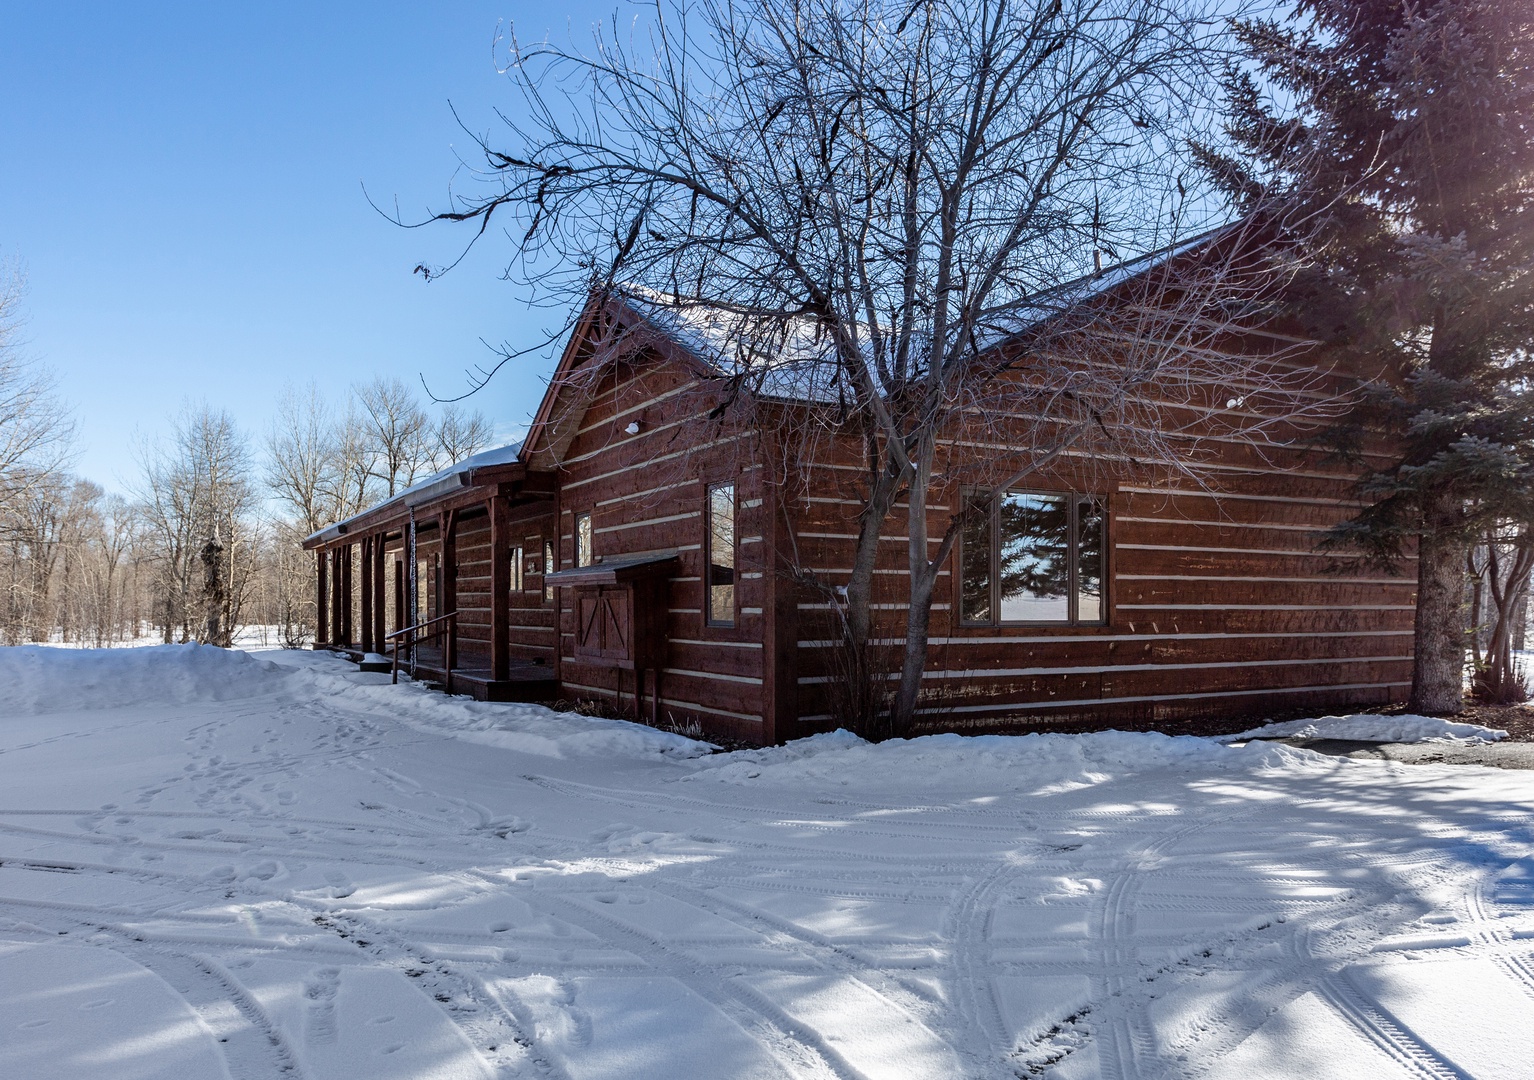 Bozeman Vacation Rentals, The Woodland Oasis - Winter snow makes this cabin even more magical